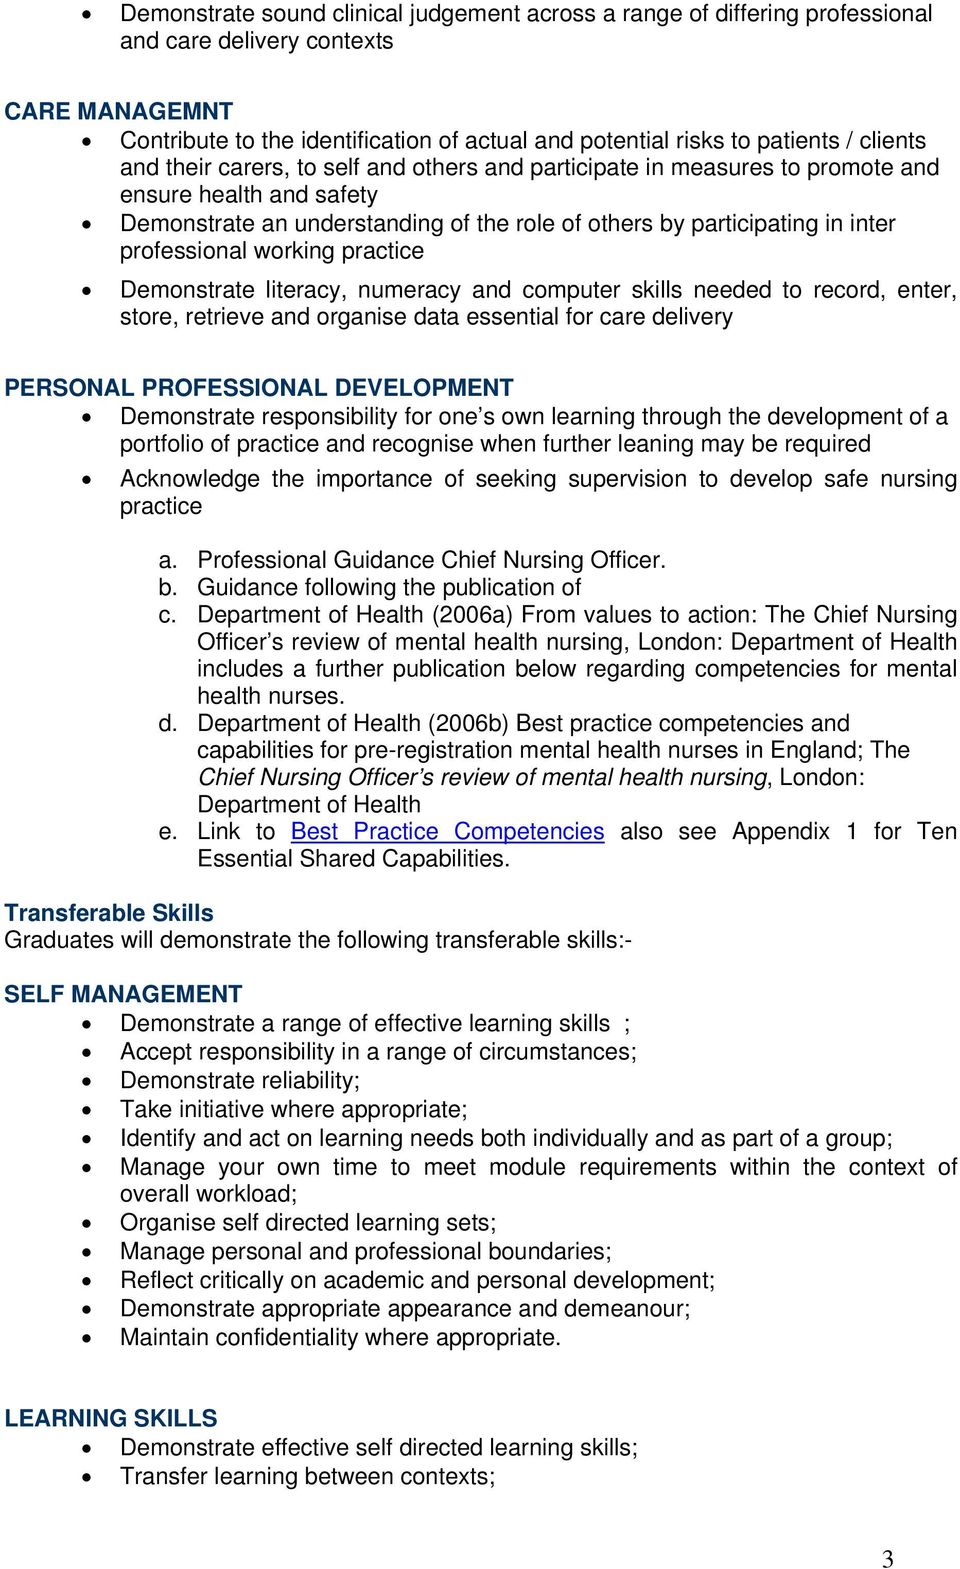 professional working practice Demonstrate literacy, numeracy and computer skills needed to record, enter, store, retrieve and organise data essential for care delivery PERSONAL PROFESSIONAL